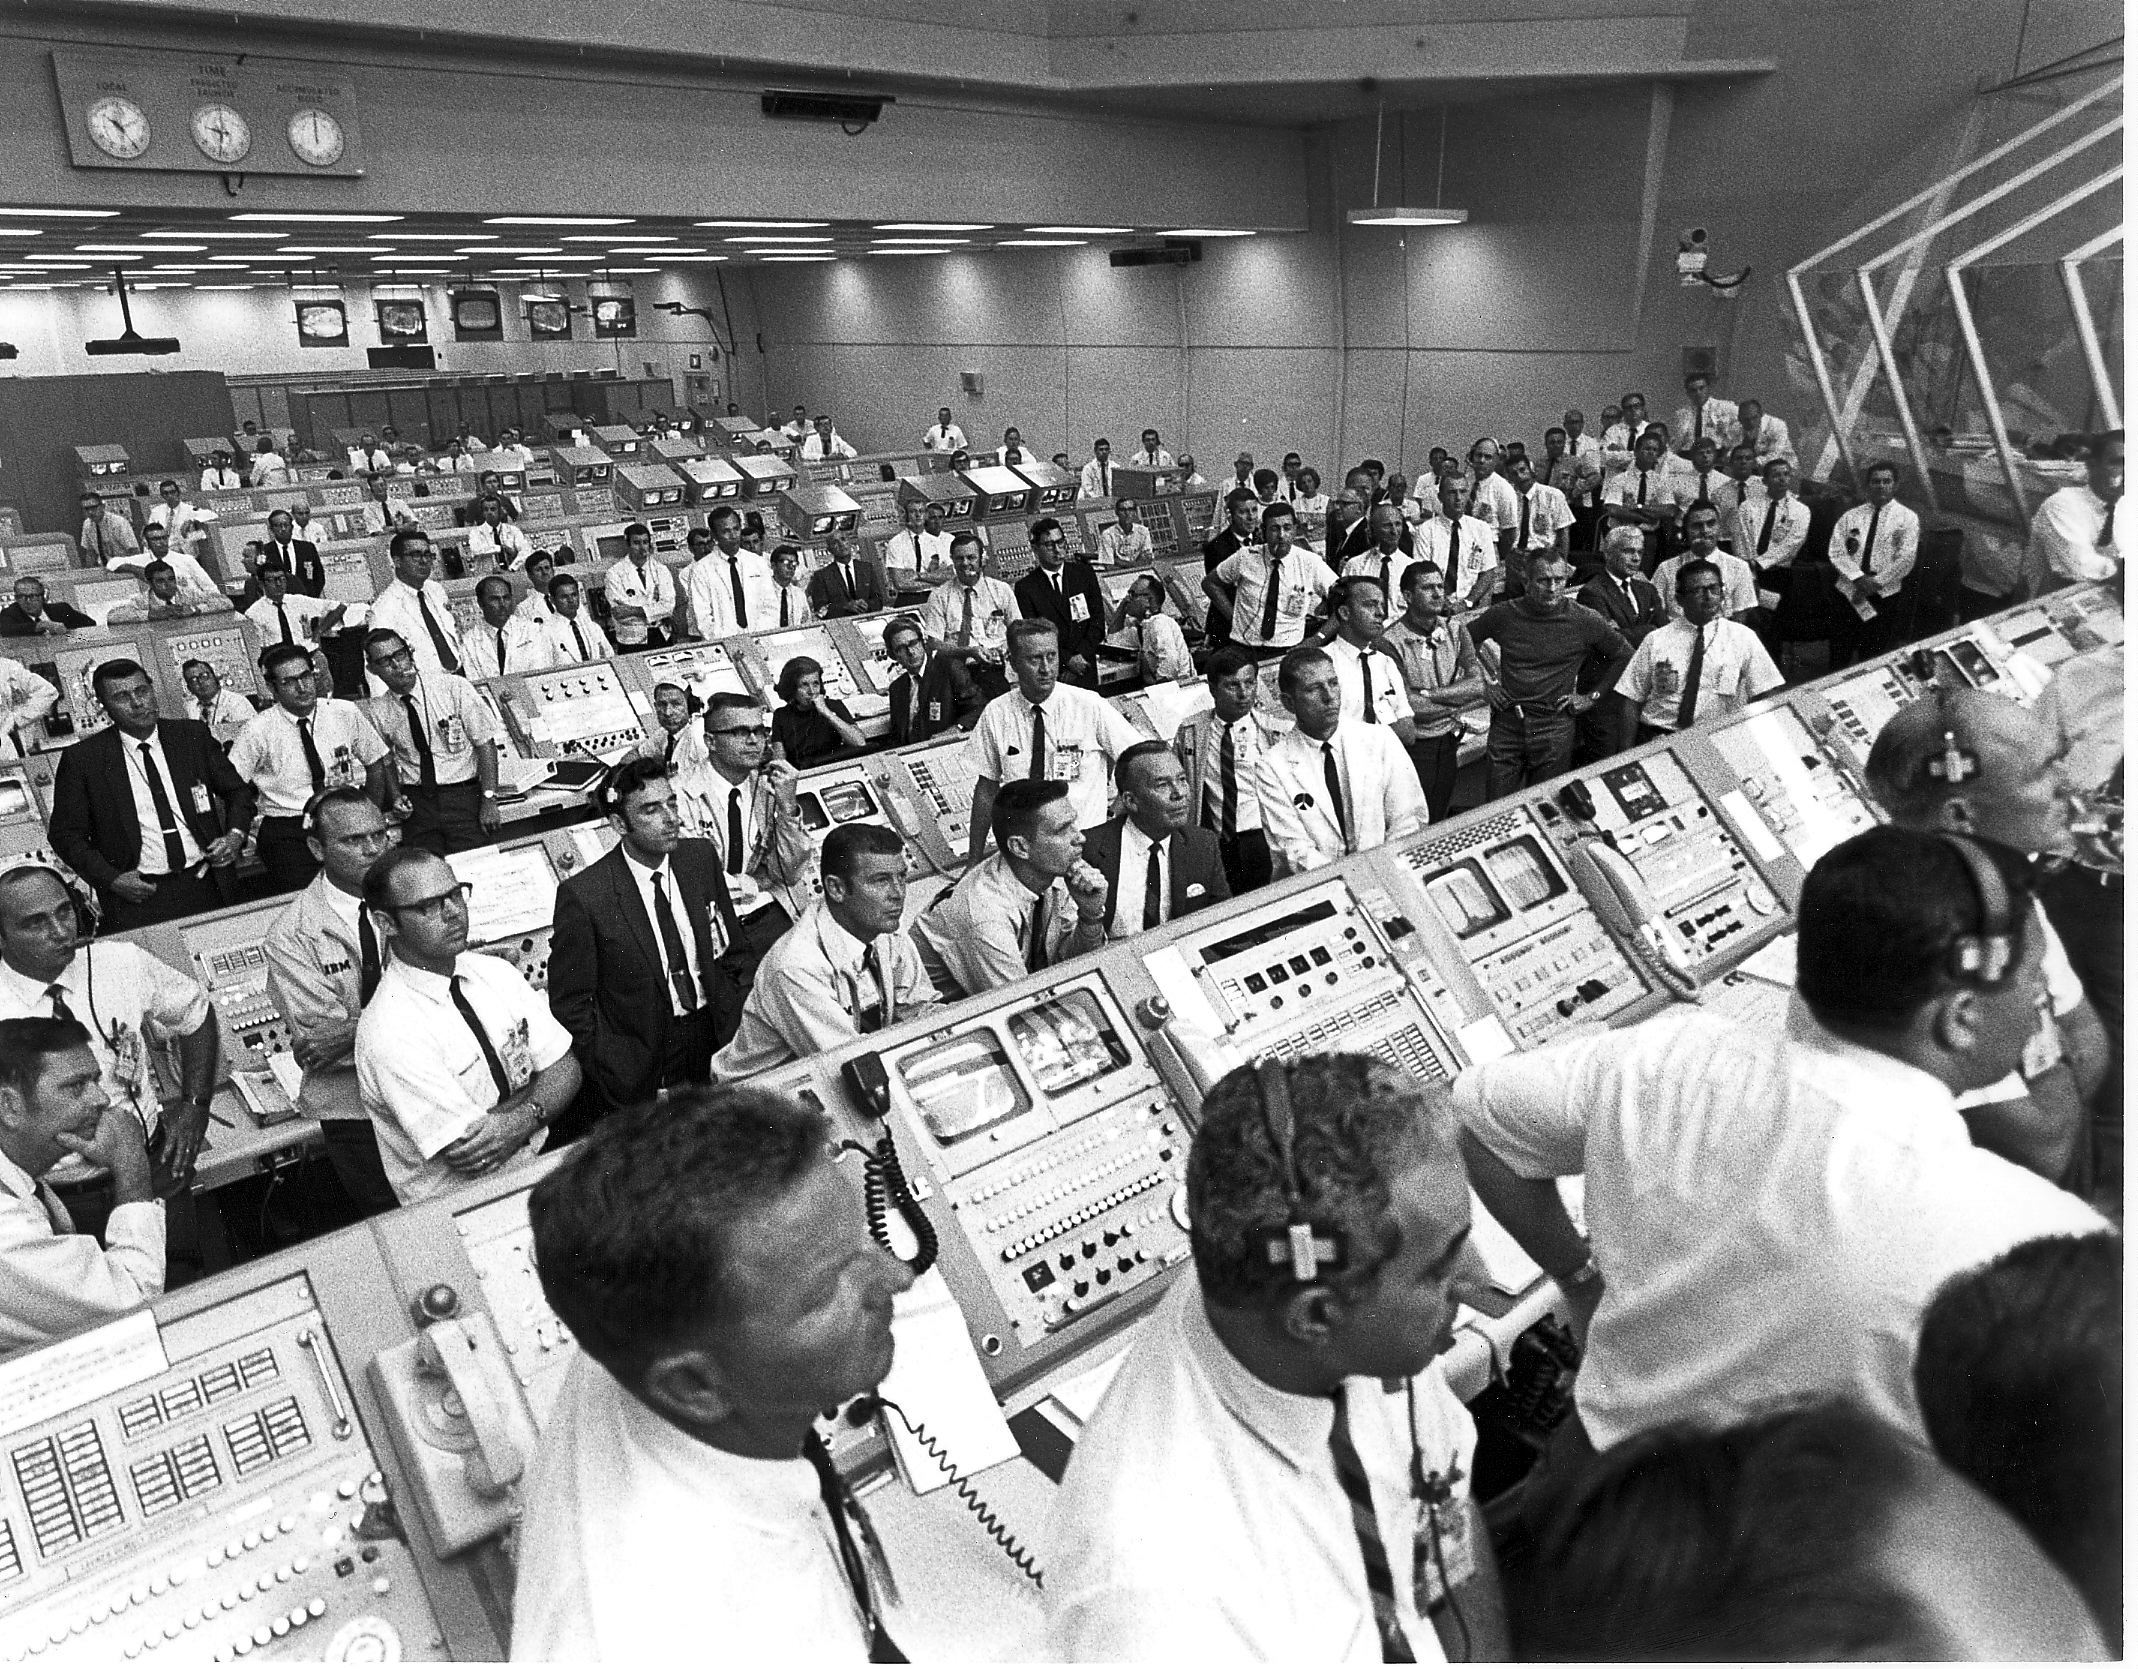 Members of the Kennedy Space Center control room at the Apollo 11 launch